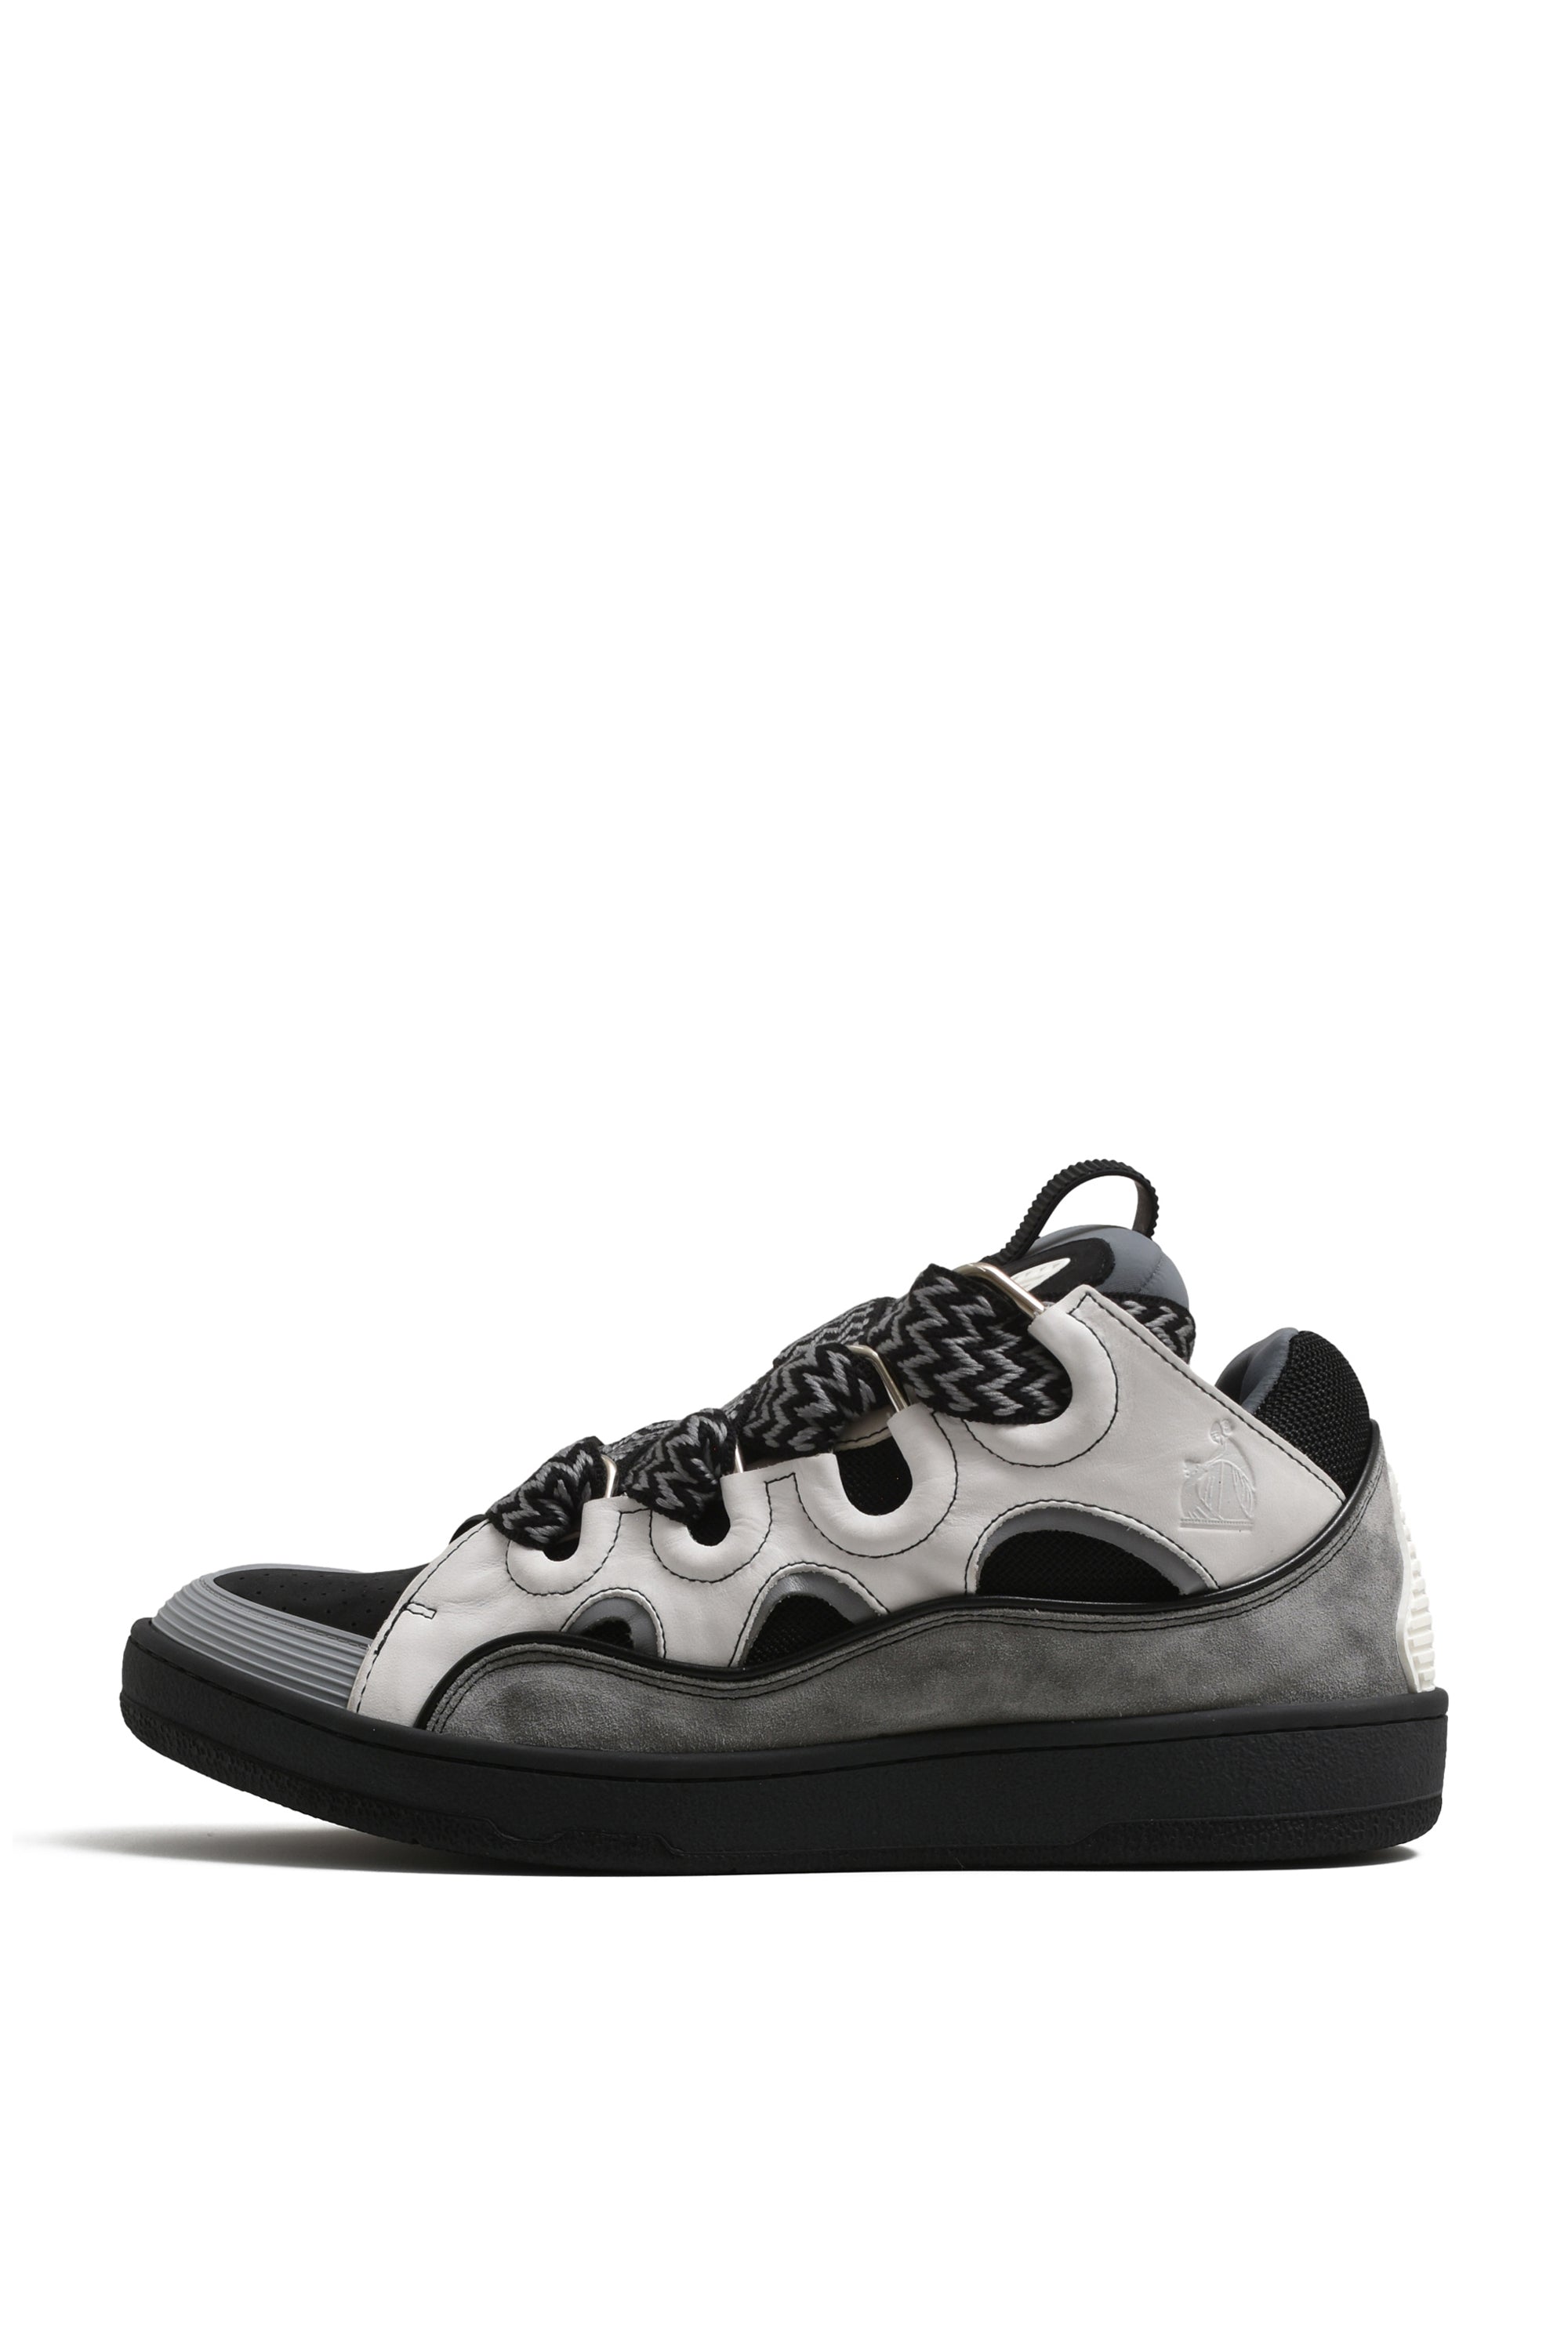 LANVIN ランバン SS24 CURB SNEAKERS / BLK WHT - NUBIAN